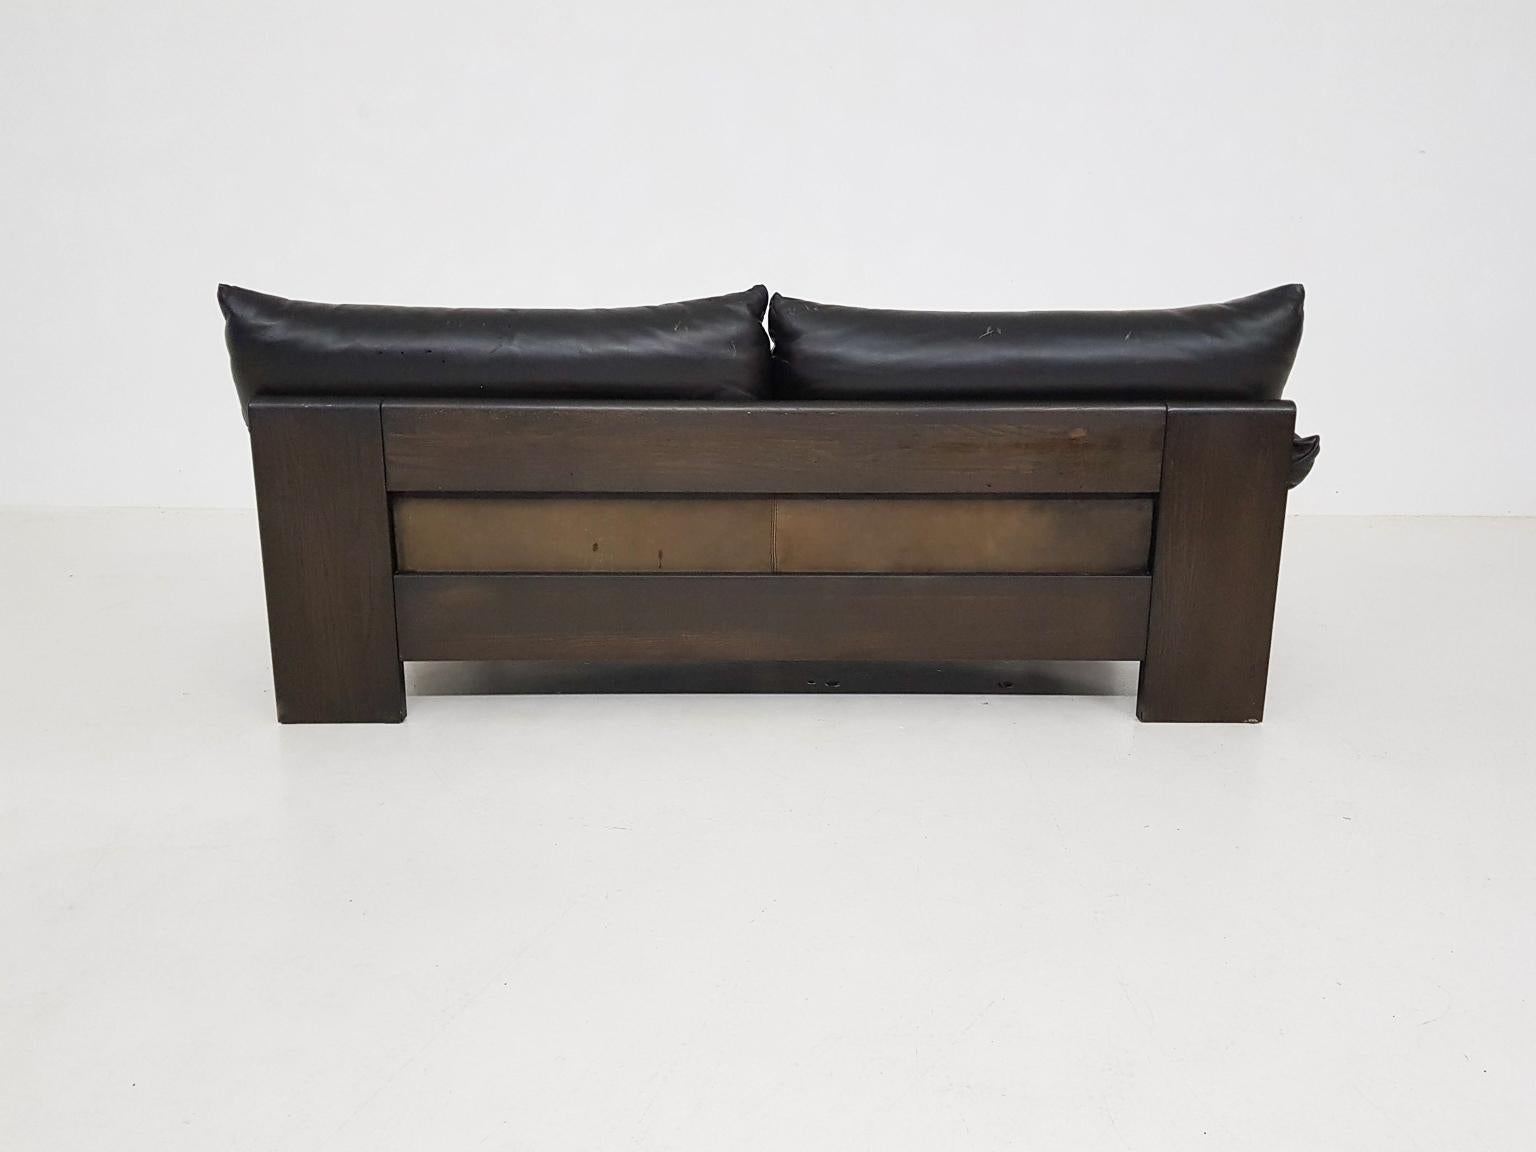 20th Century Brutalist Oak and Leather 2-Seat Sofa or Loveseat by Leolux, Dutch Design, 1970s